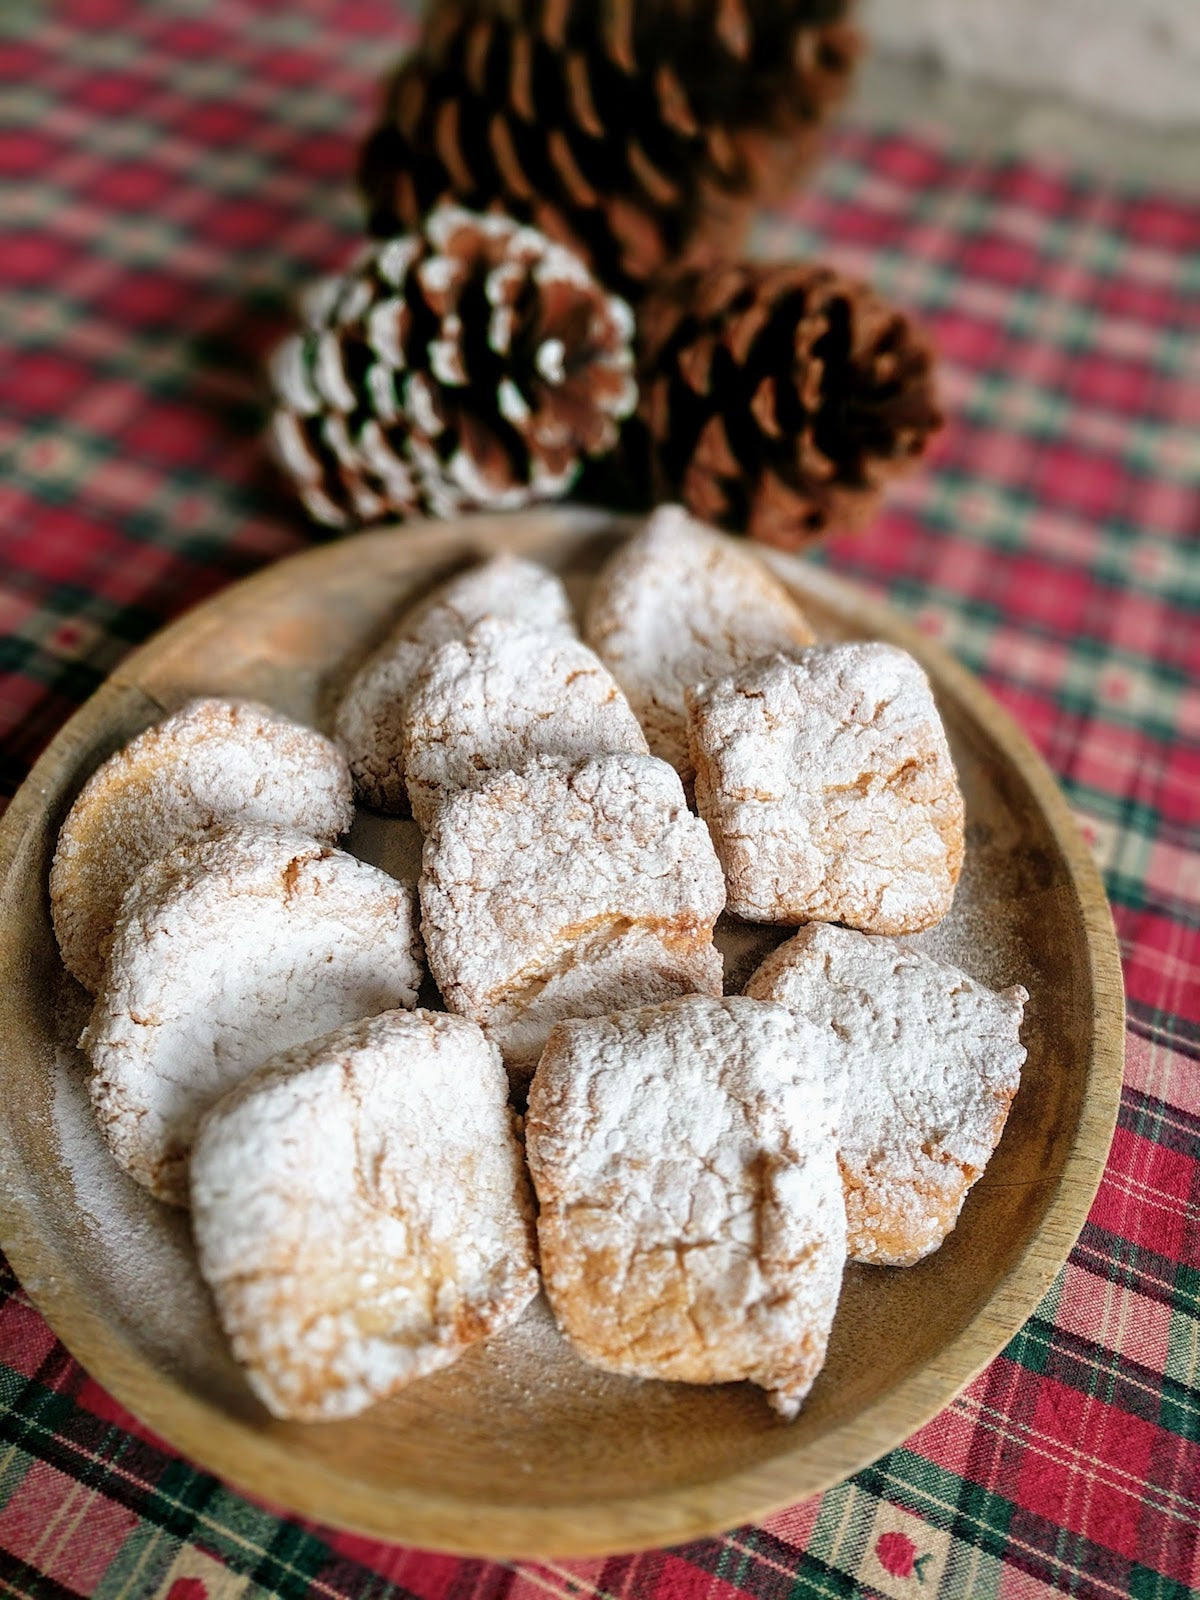 Sicilian Almond Cookies - to enjoy during Christmas time